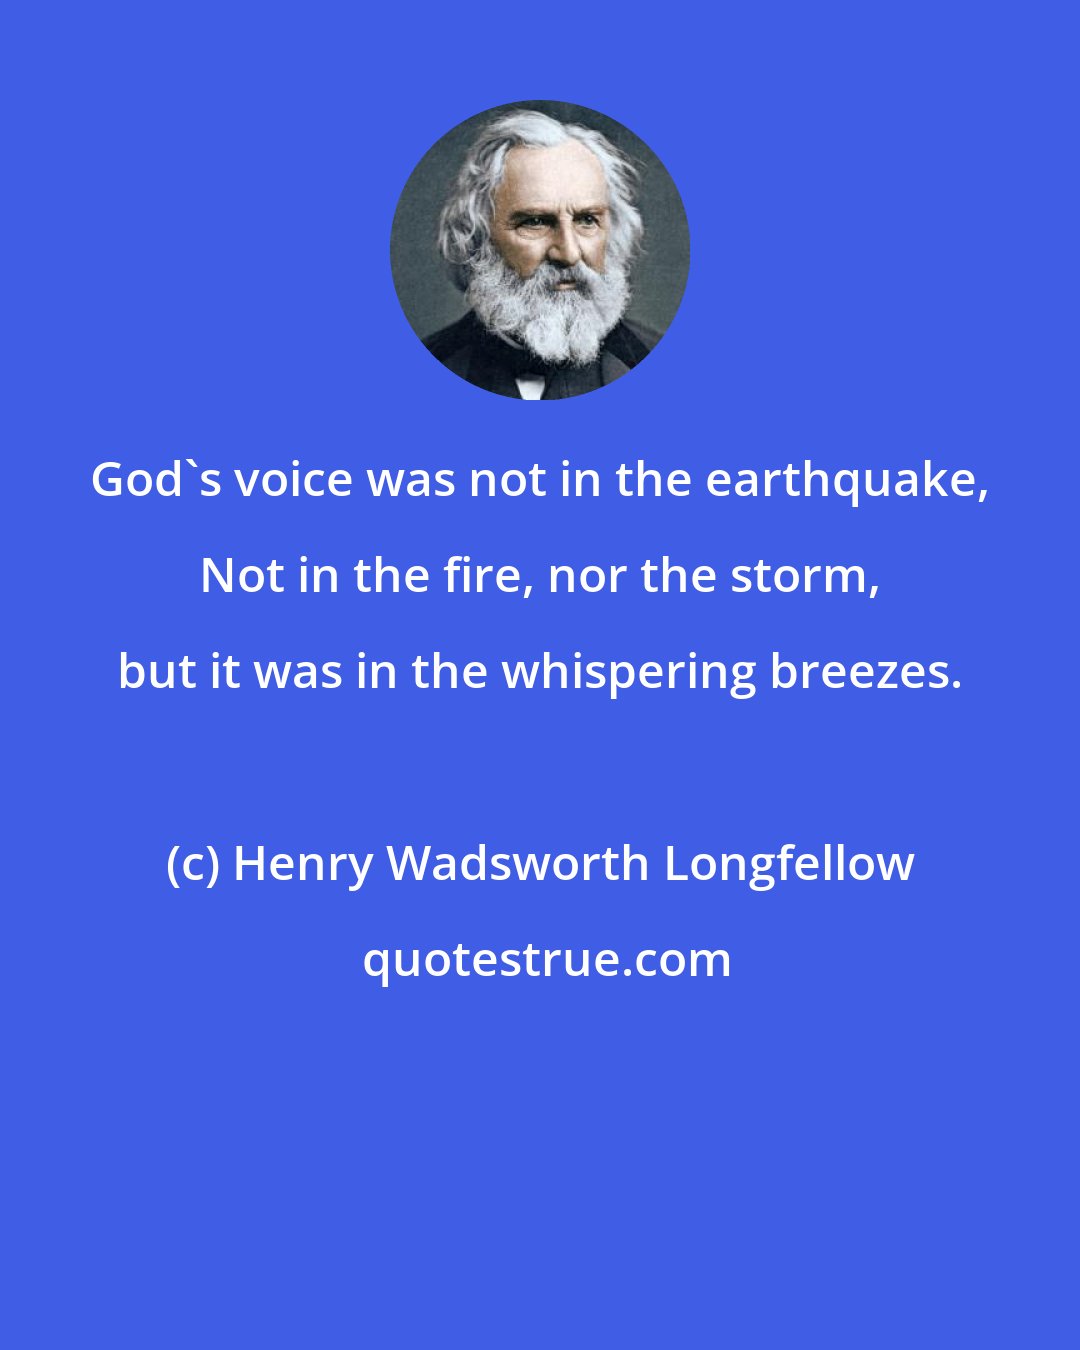 Henry Wadsworth Longfellow: God's voice was not in the earthquake, Not in the fire, nor the storm, but it was in the whispering breezes.